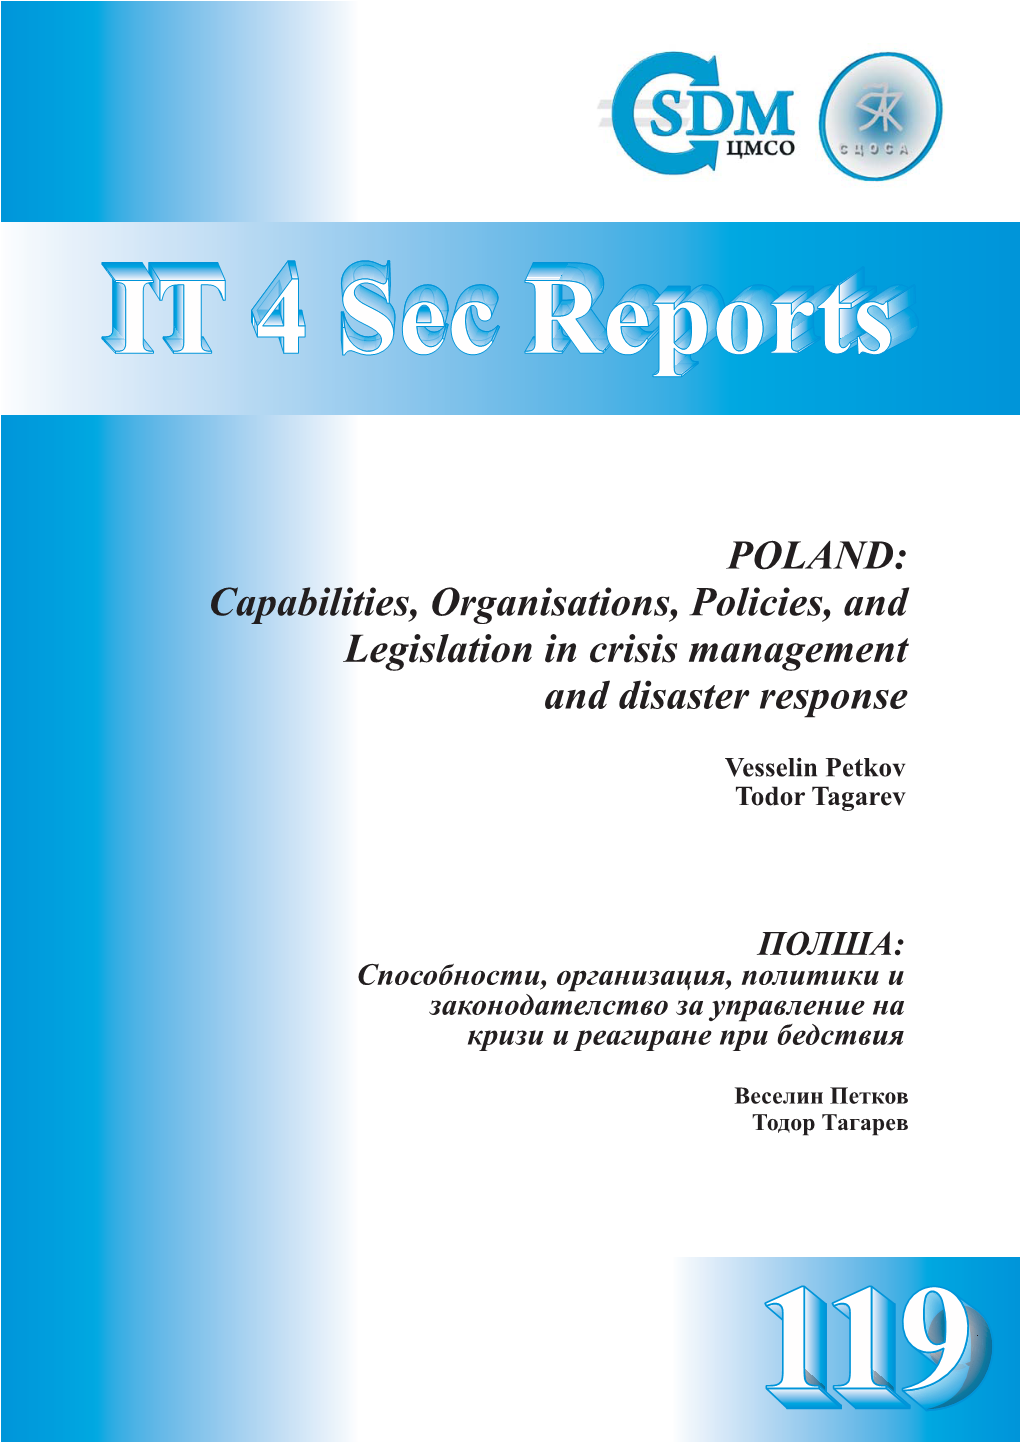 POLAND: Capabilities, Organisations, Policies, and Legislation in Crisis Management and Disaster Response